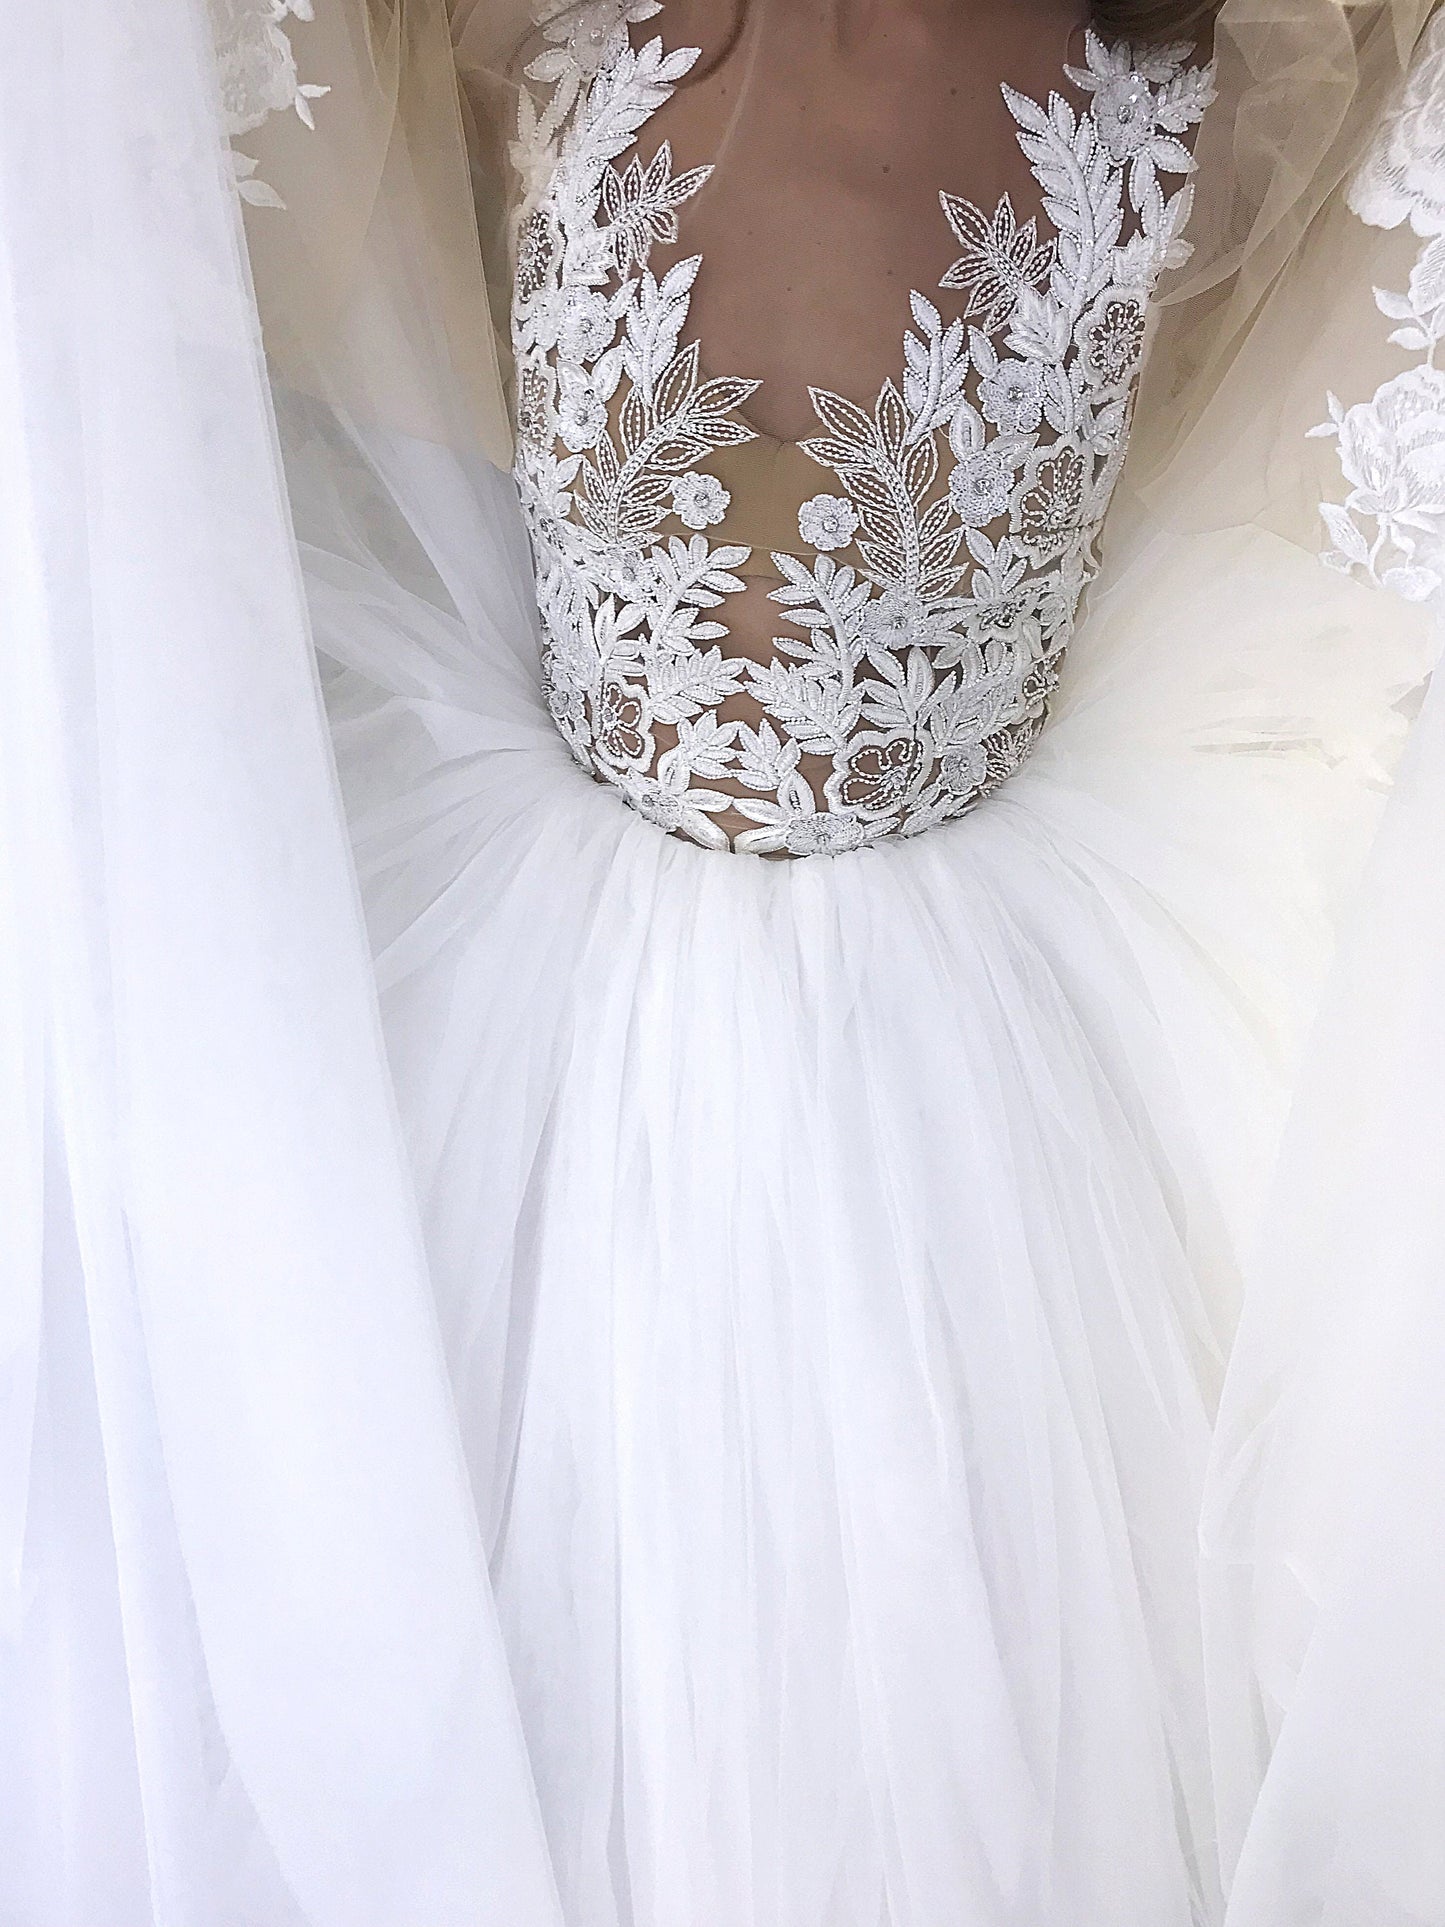 Lace wedding dress, hand embroidery